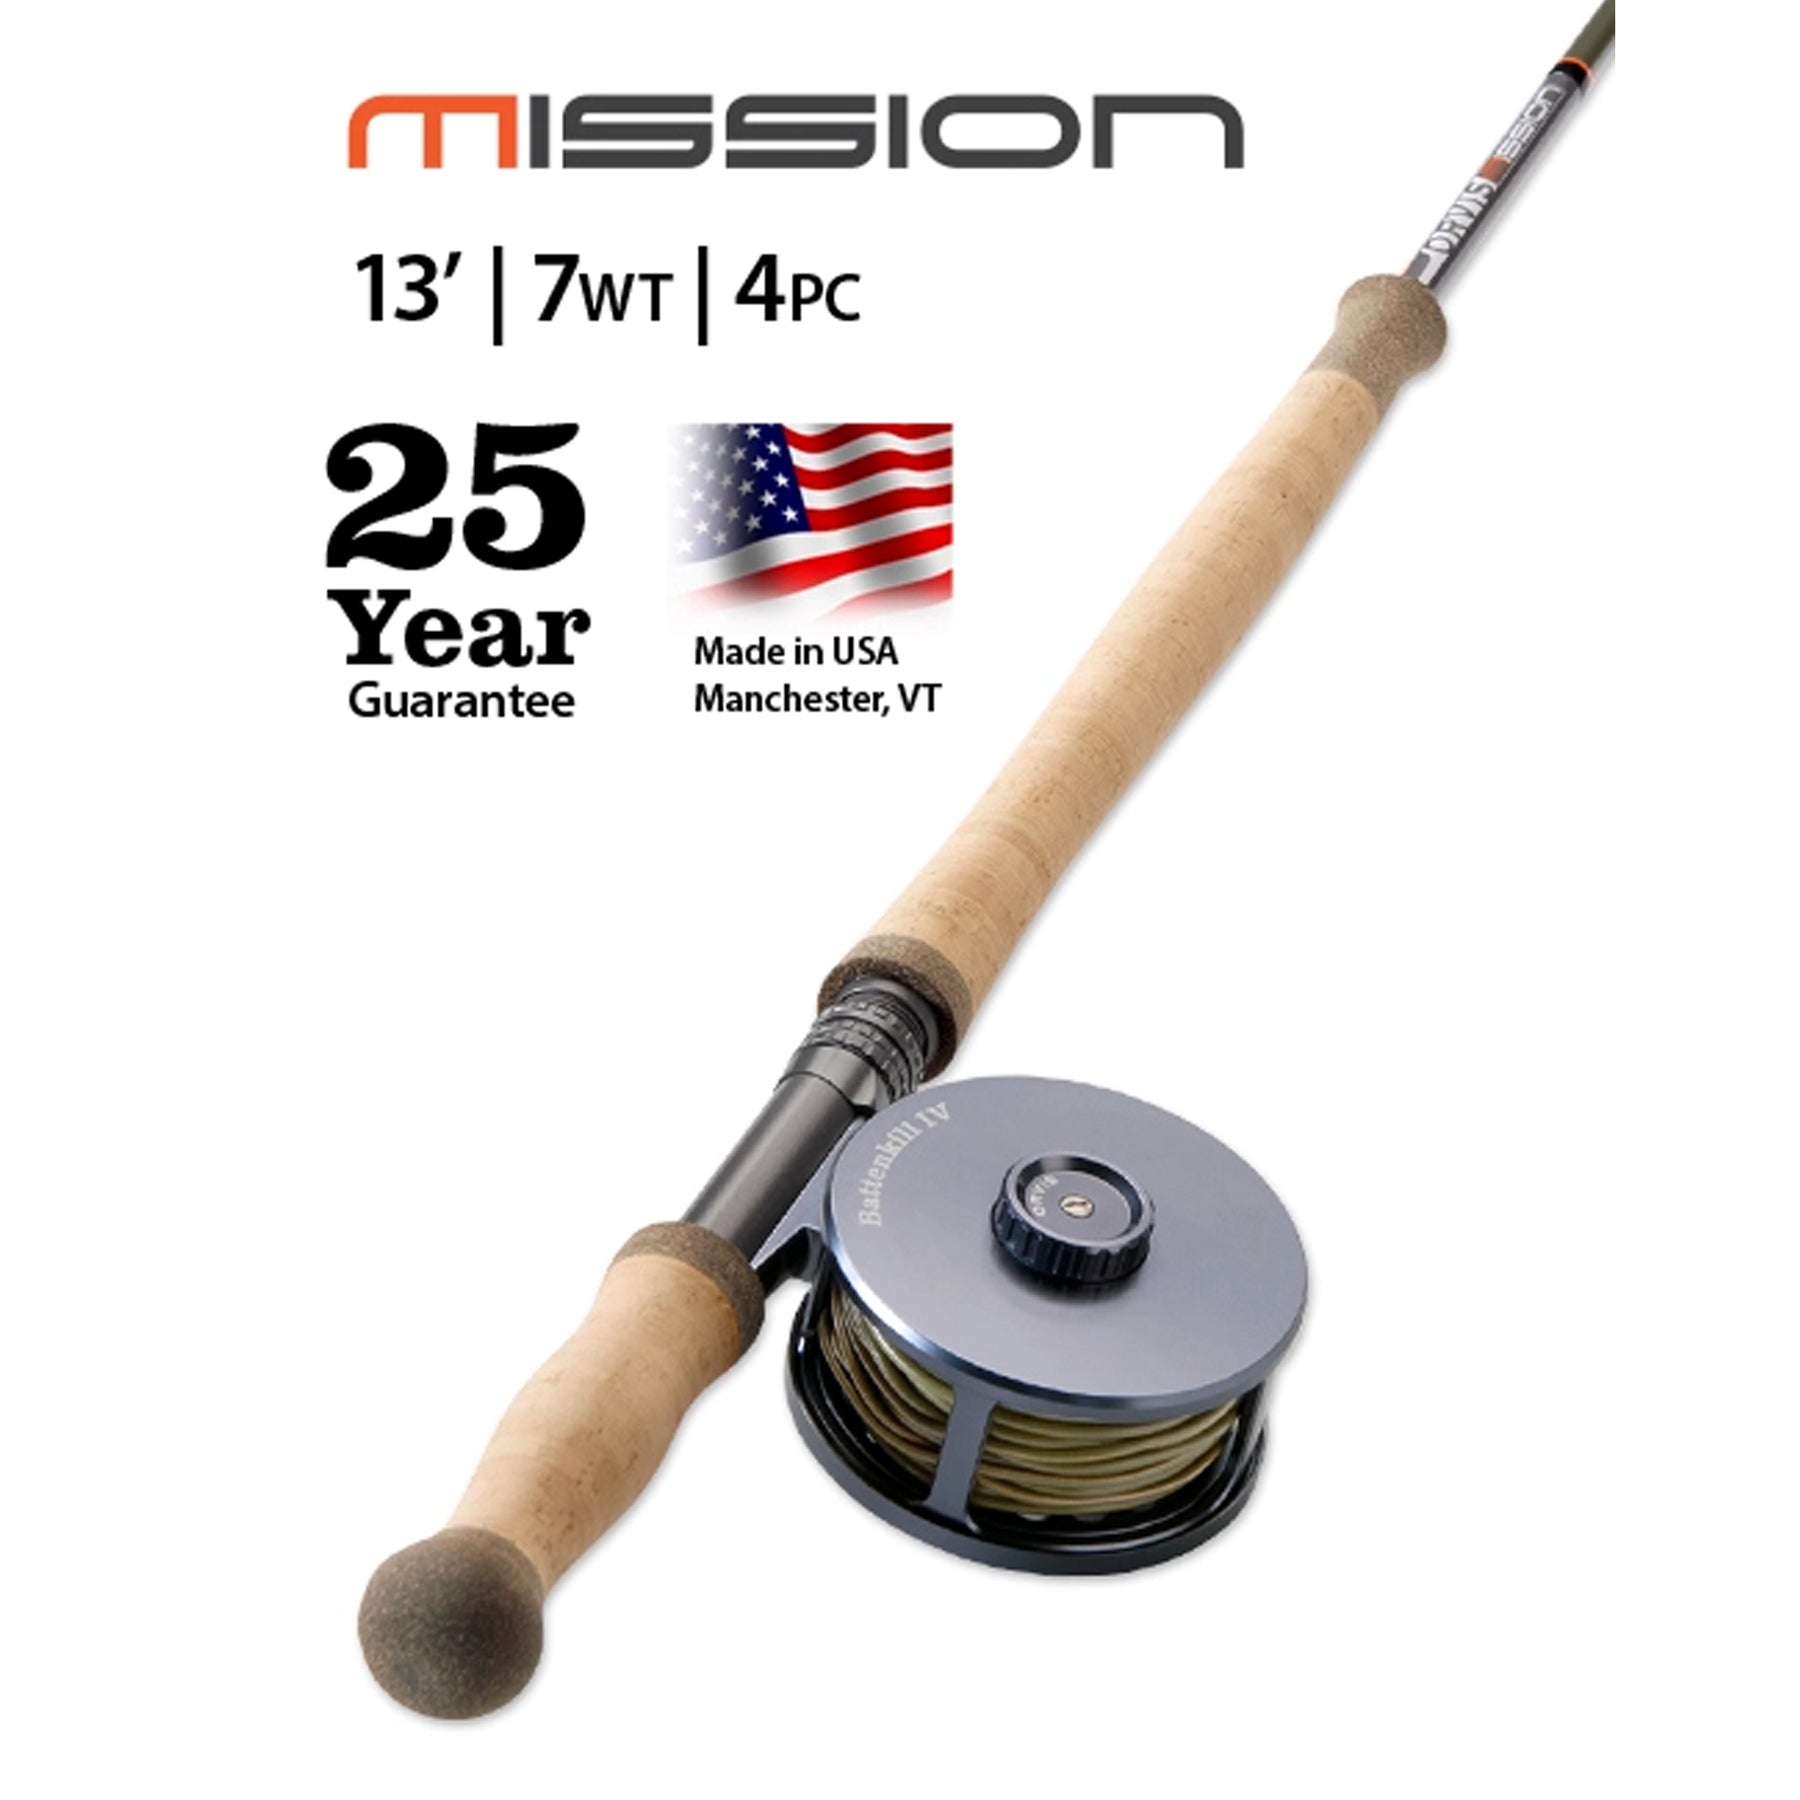 Orvis Mission Two Handed Fly Rod 13' 7wt